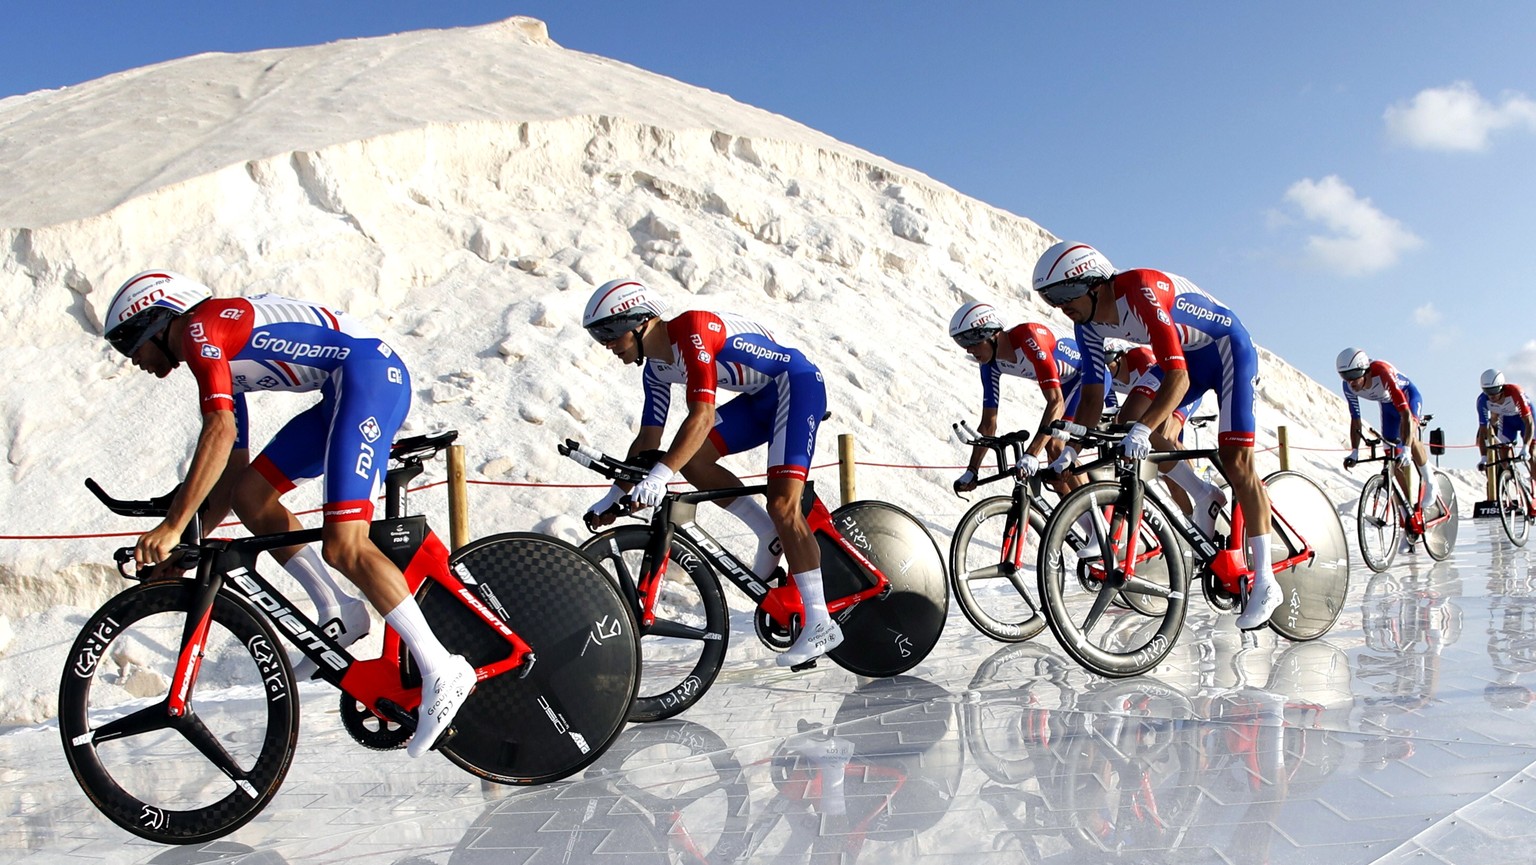 epa07791269 Cyclists of Groupama FDJ team in action during the team time trial during the first stage of the La Vuelta cycling race in Torrevieja, eastern Spain, 24 August 2019. EPA/JAVIER LIZON